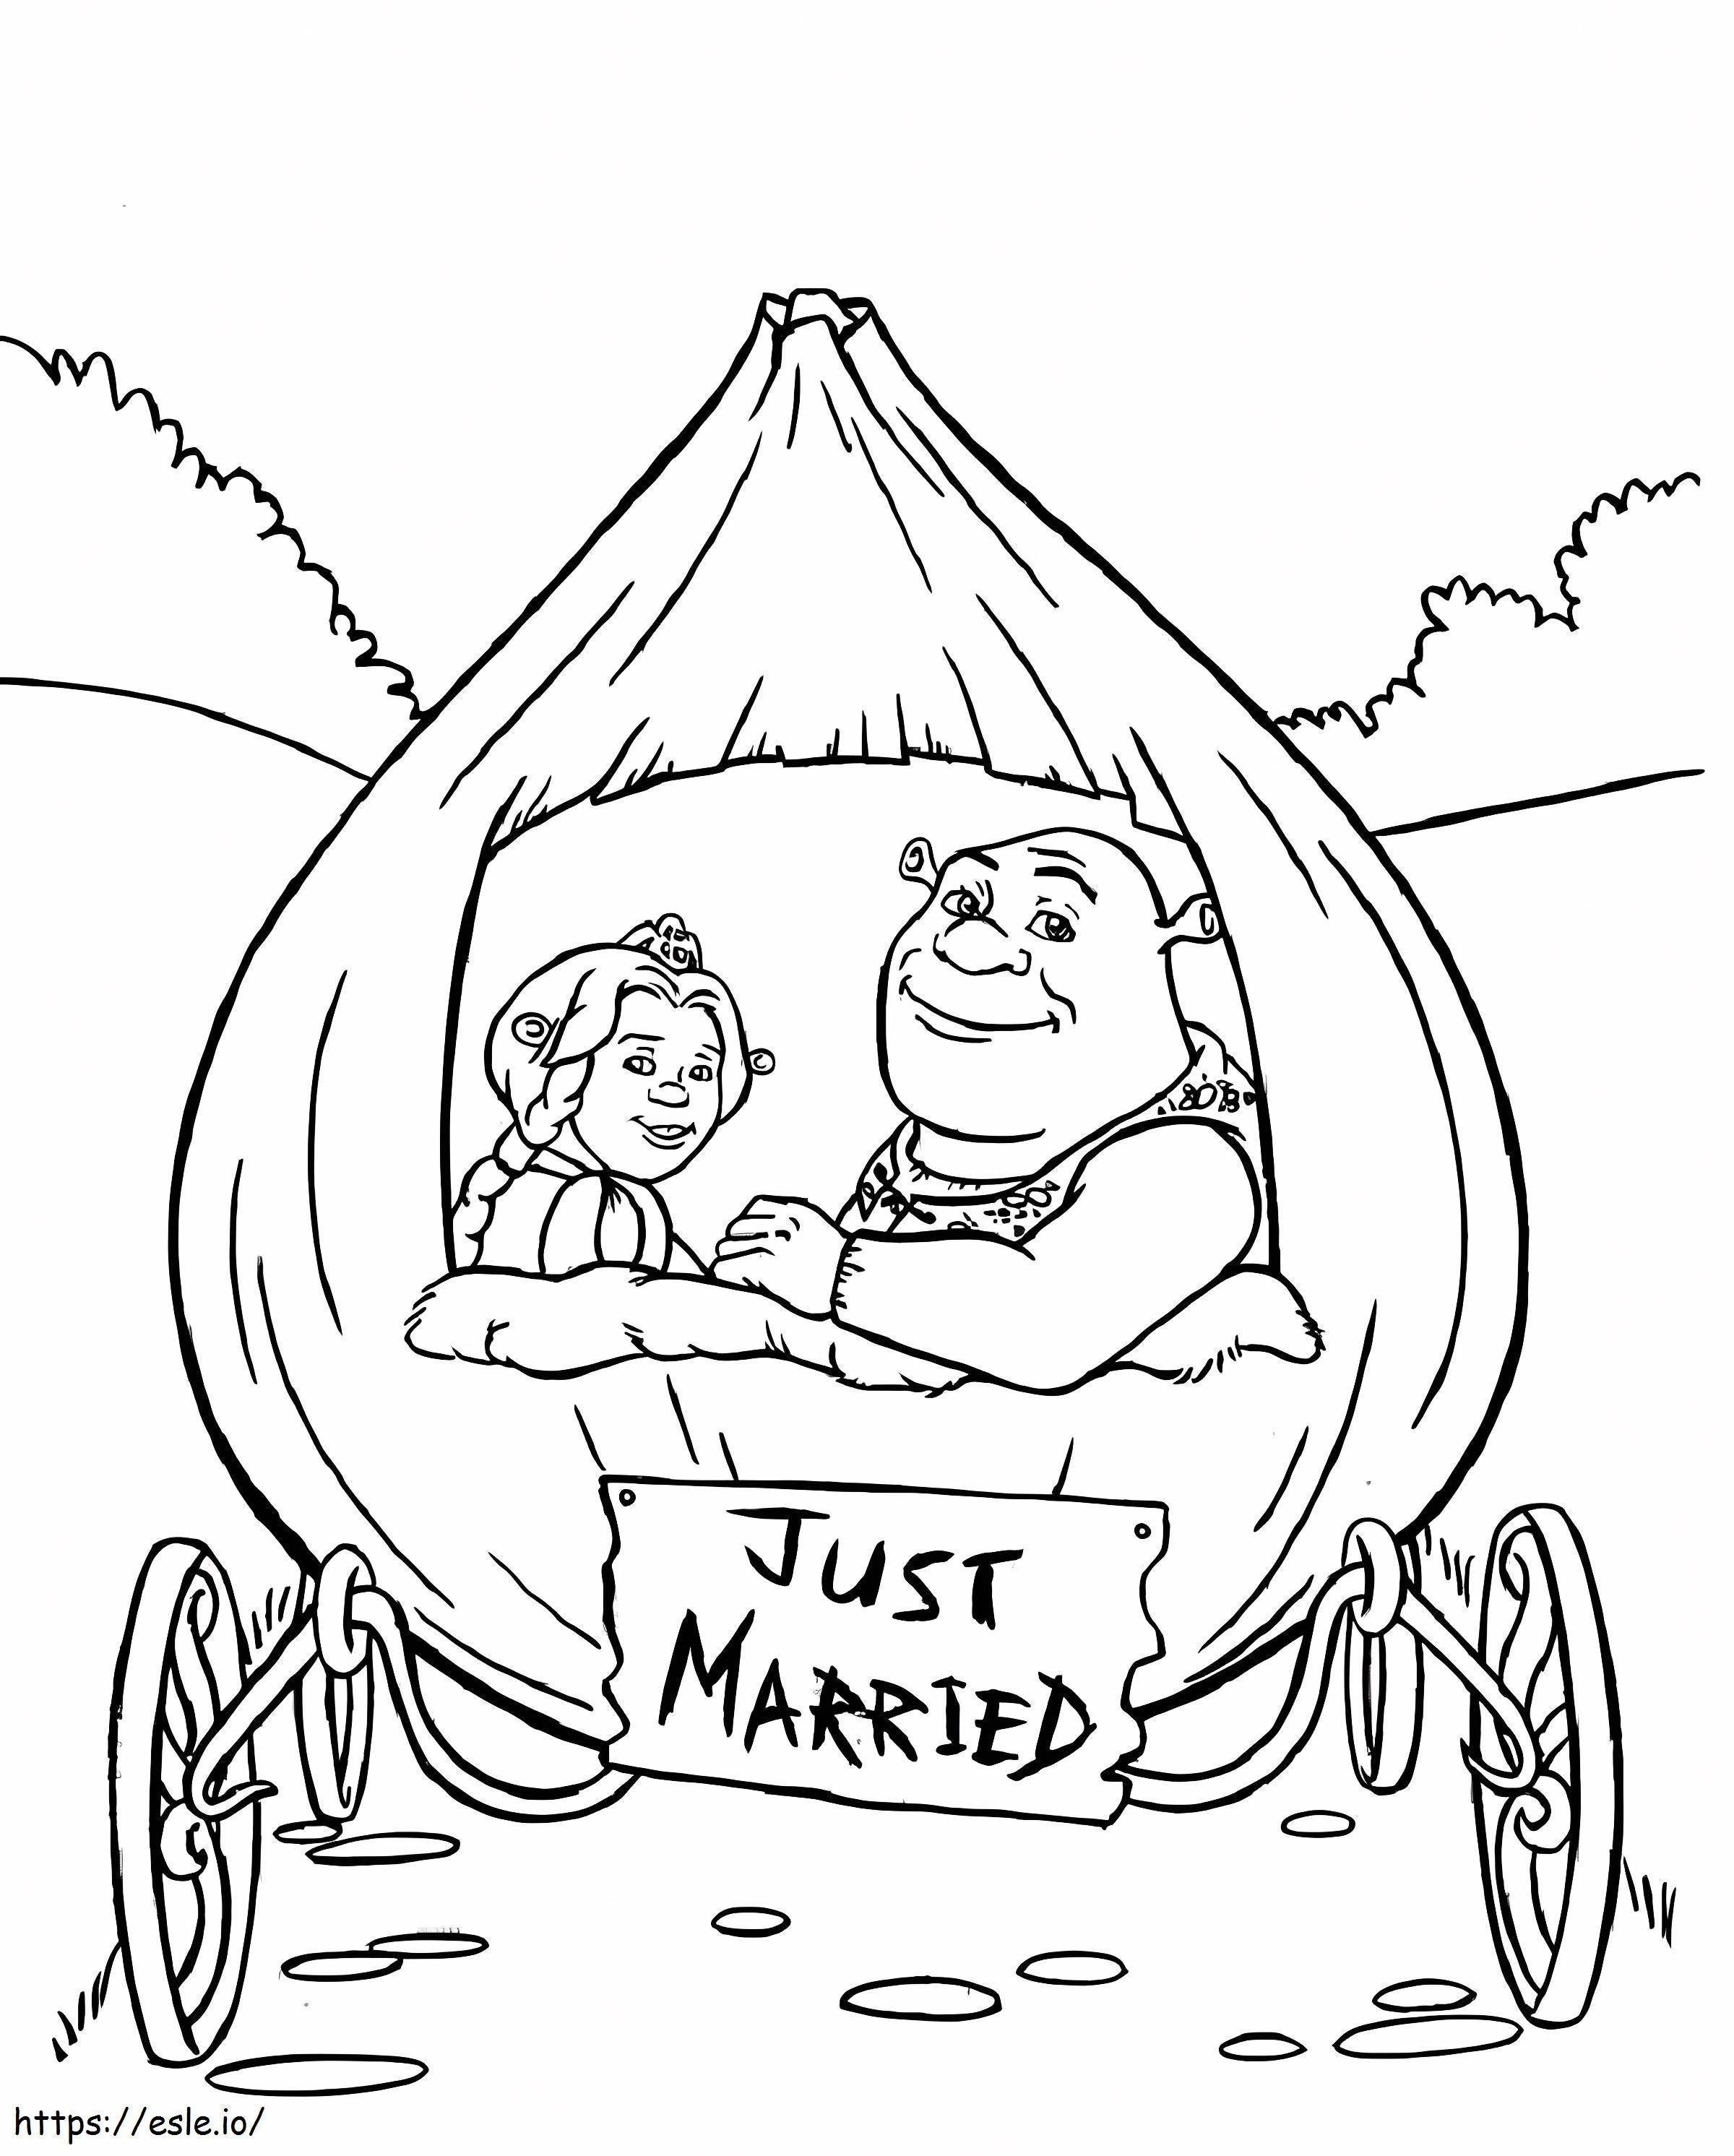 Shrek And Princess Fiona In Onion coloring page